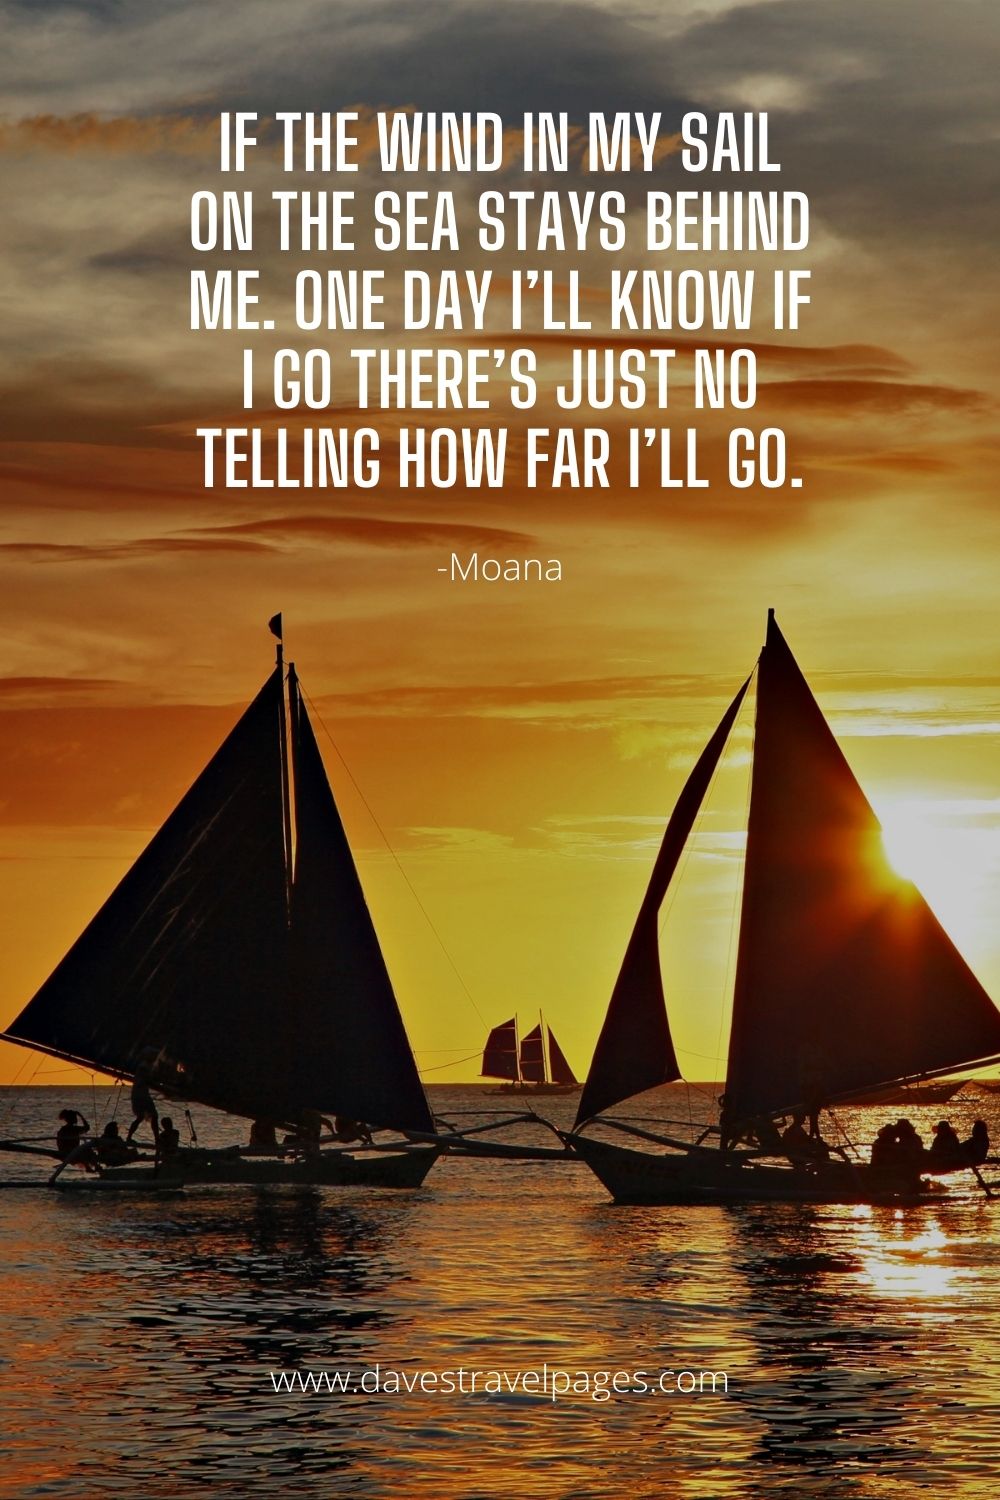 If the wind in my sail on the sea stays behind me. One day I’ll know, if I go there’s just no telling how far I’ll go.